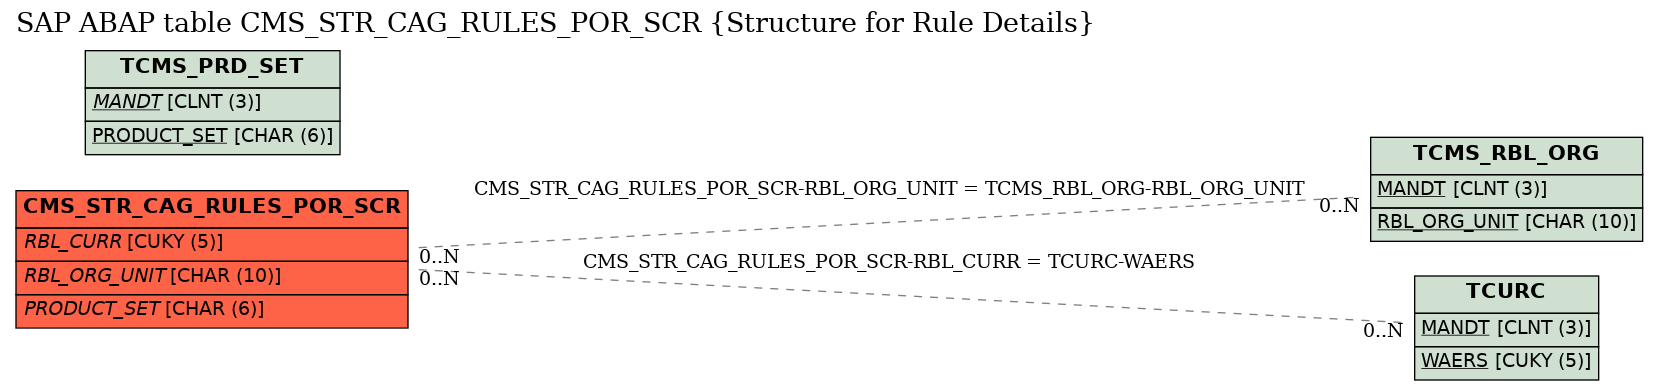 E-R Diagram for table CMS_STR_CAG_RULES_POR_SCR (Structure for Rule Details)